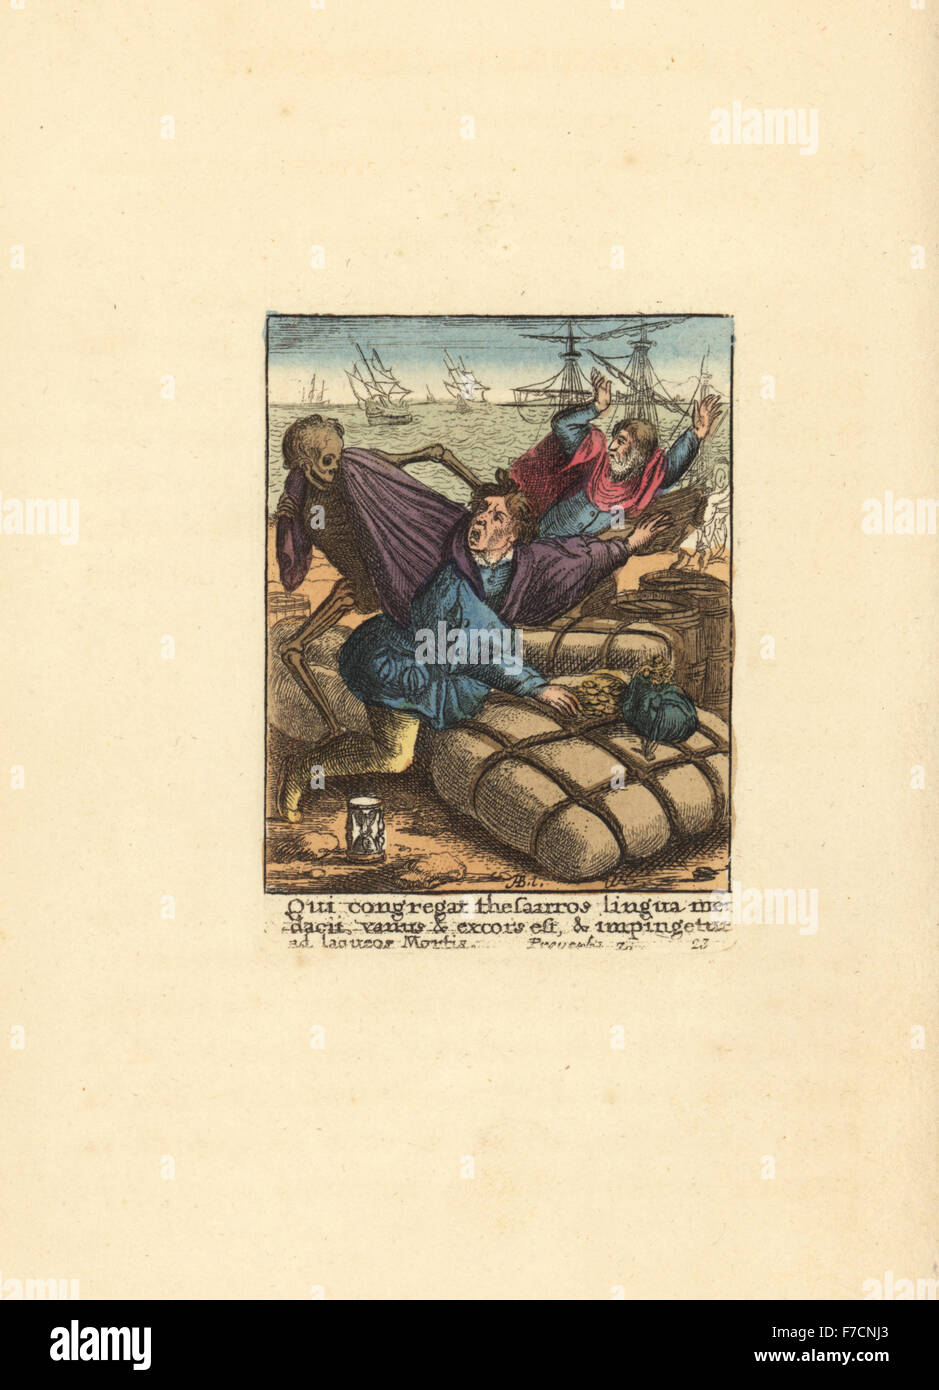 Skeleton of Death pulling the hair of a Merchant as he counts his money and examines his goods on the dock. Handcoloured copperplate engraving by Wenceslaus Hollar from The Dance of Death by Hans Holbein, Coxhead, London, 1816. Stock Photo